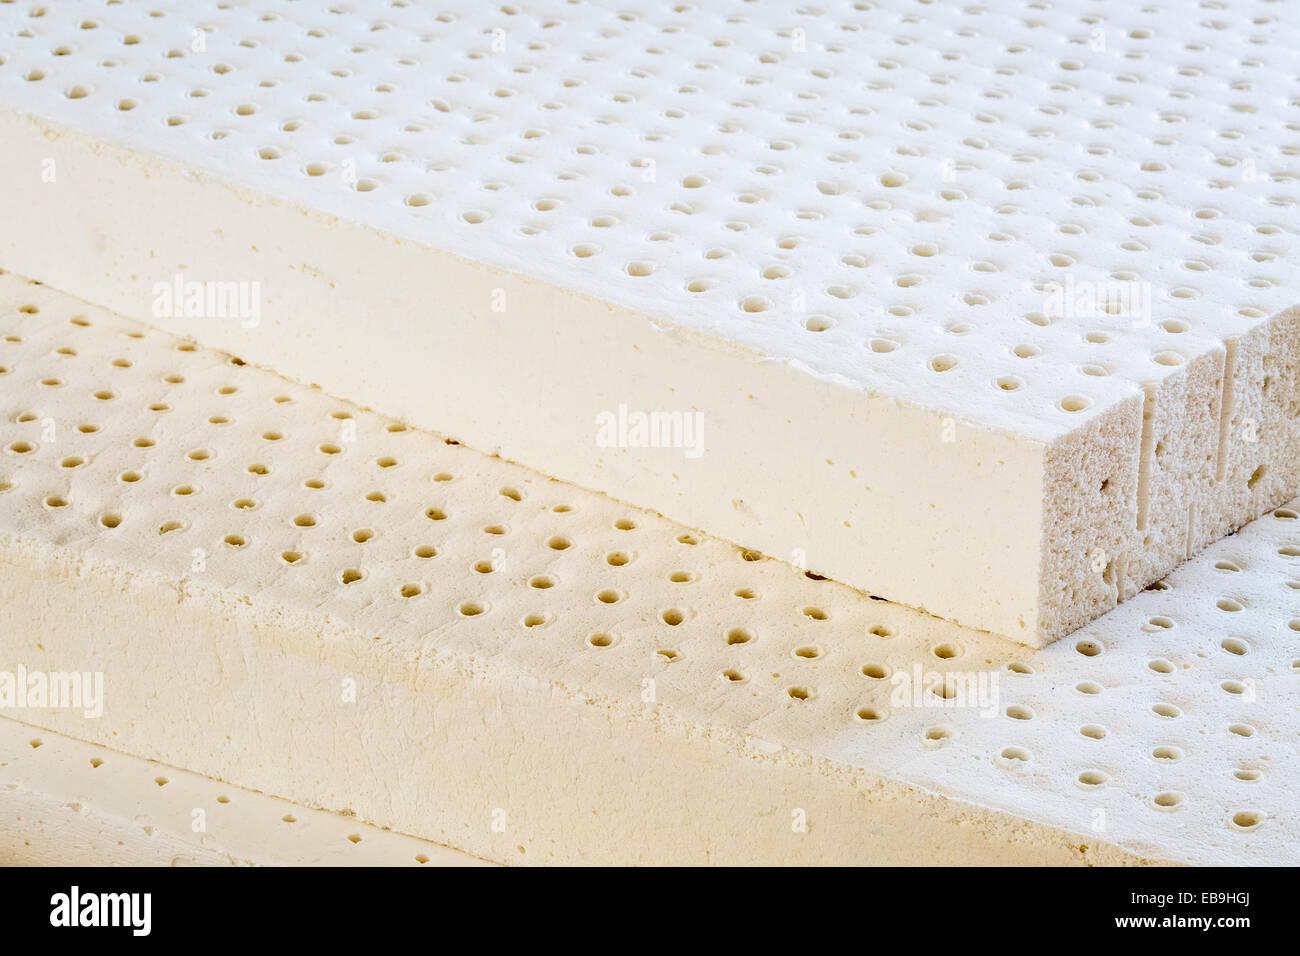 exposed layers of natural latex from an organic mattress Stock Photo